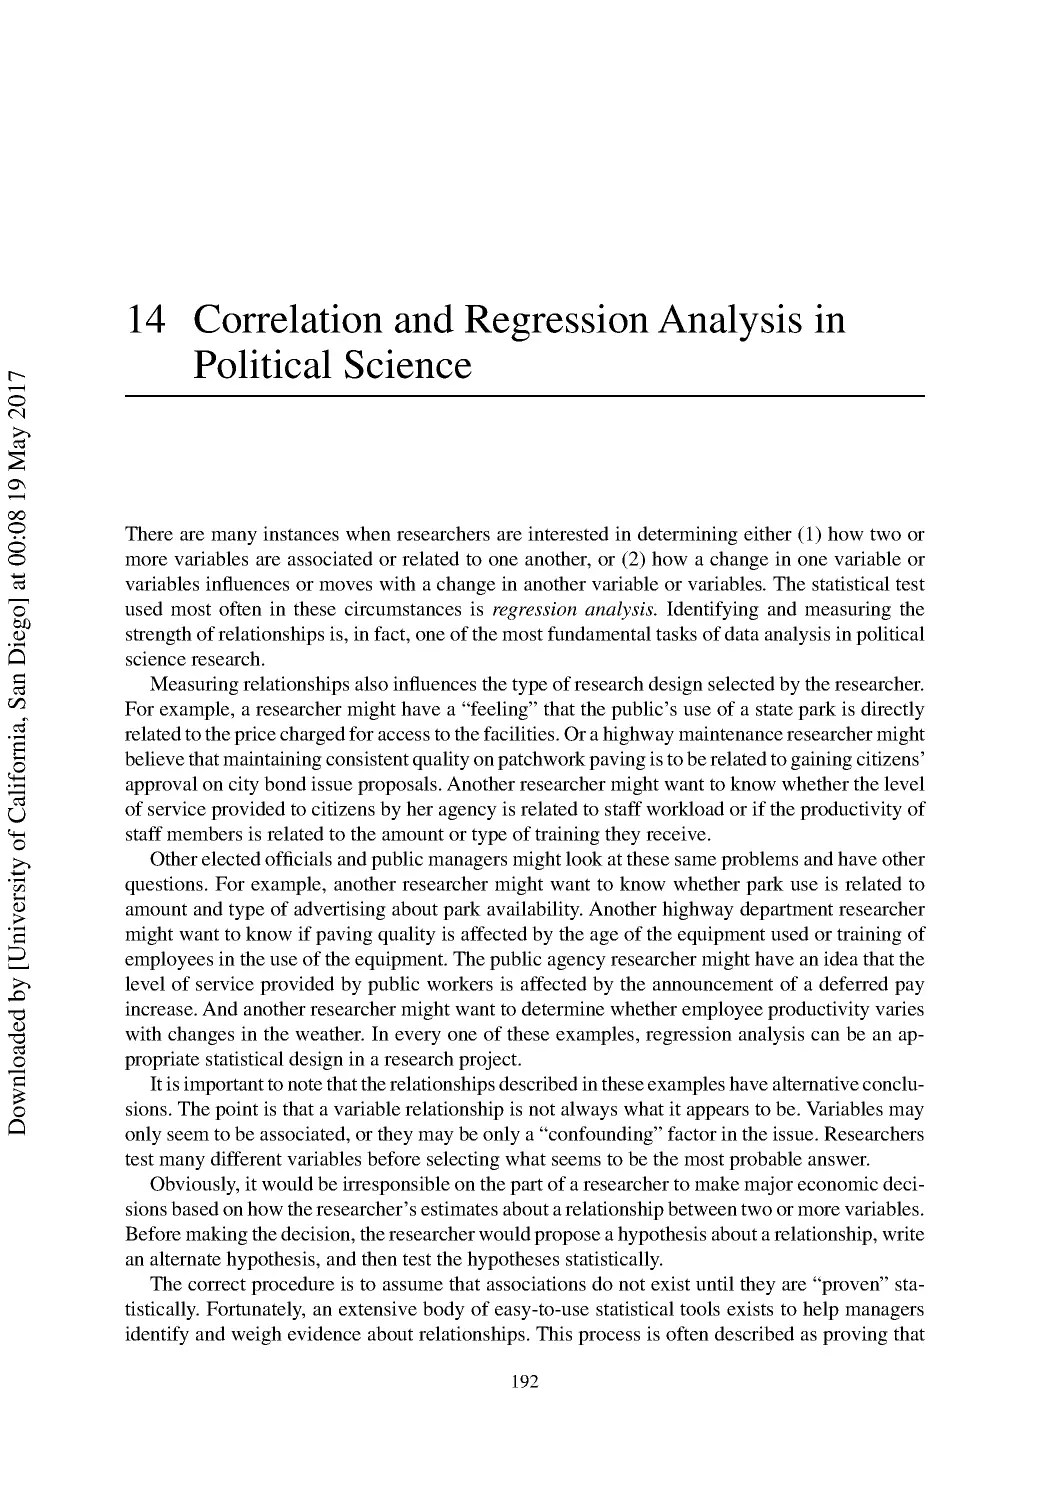 14 Correlation and Regression Analysis in Political Science